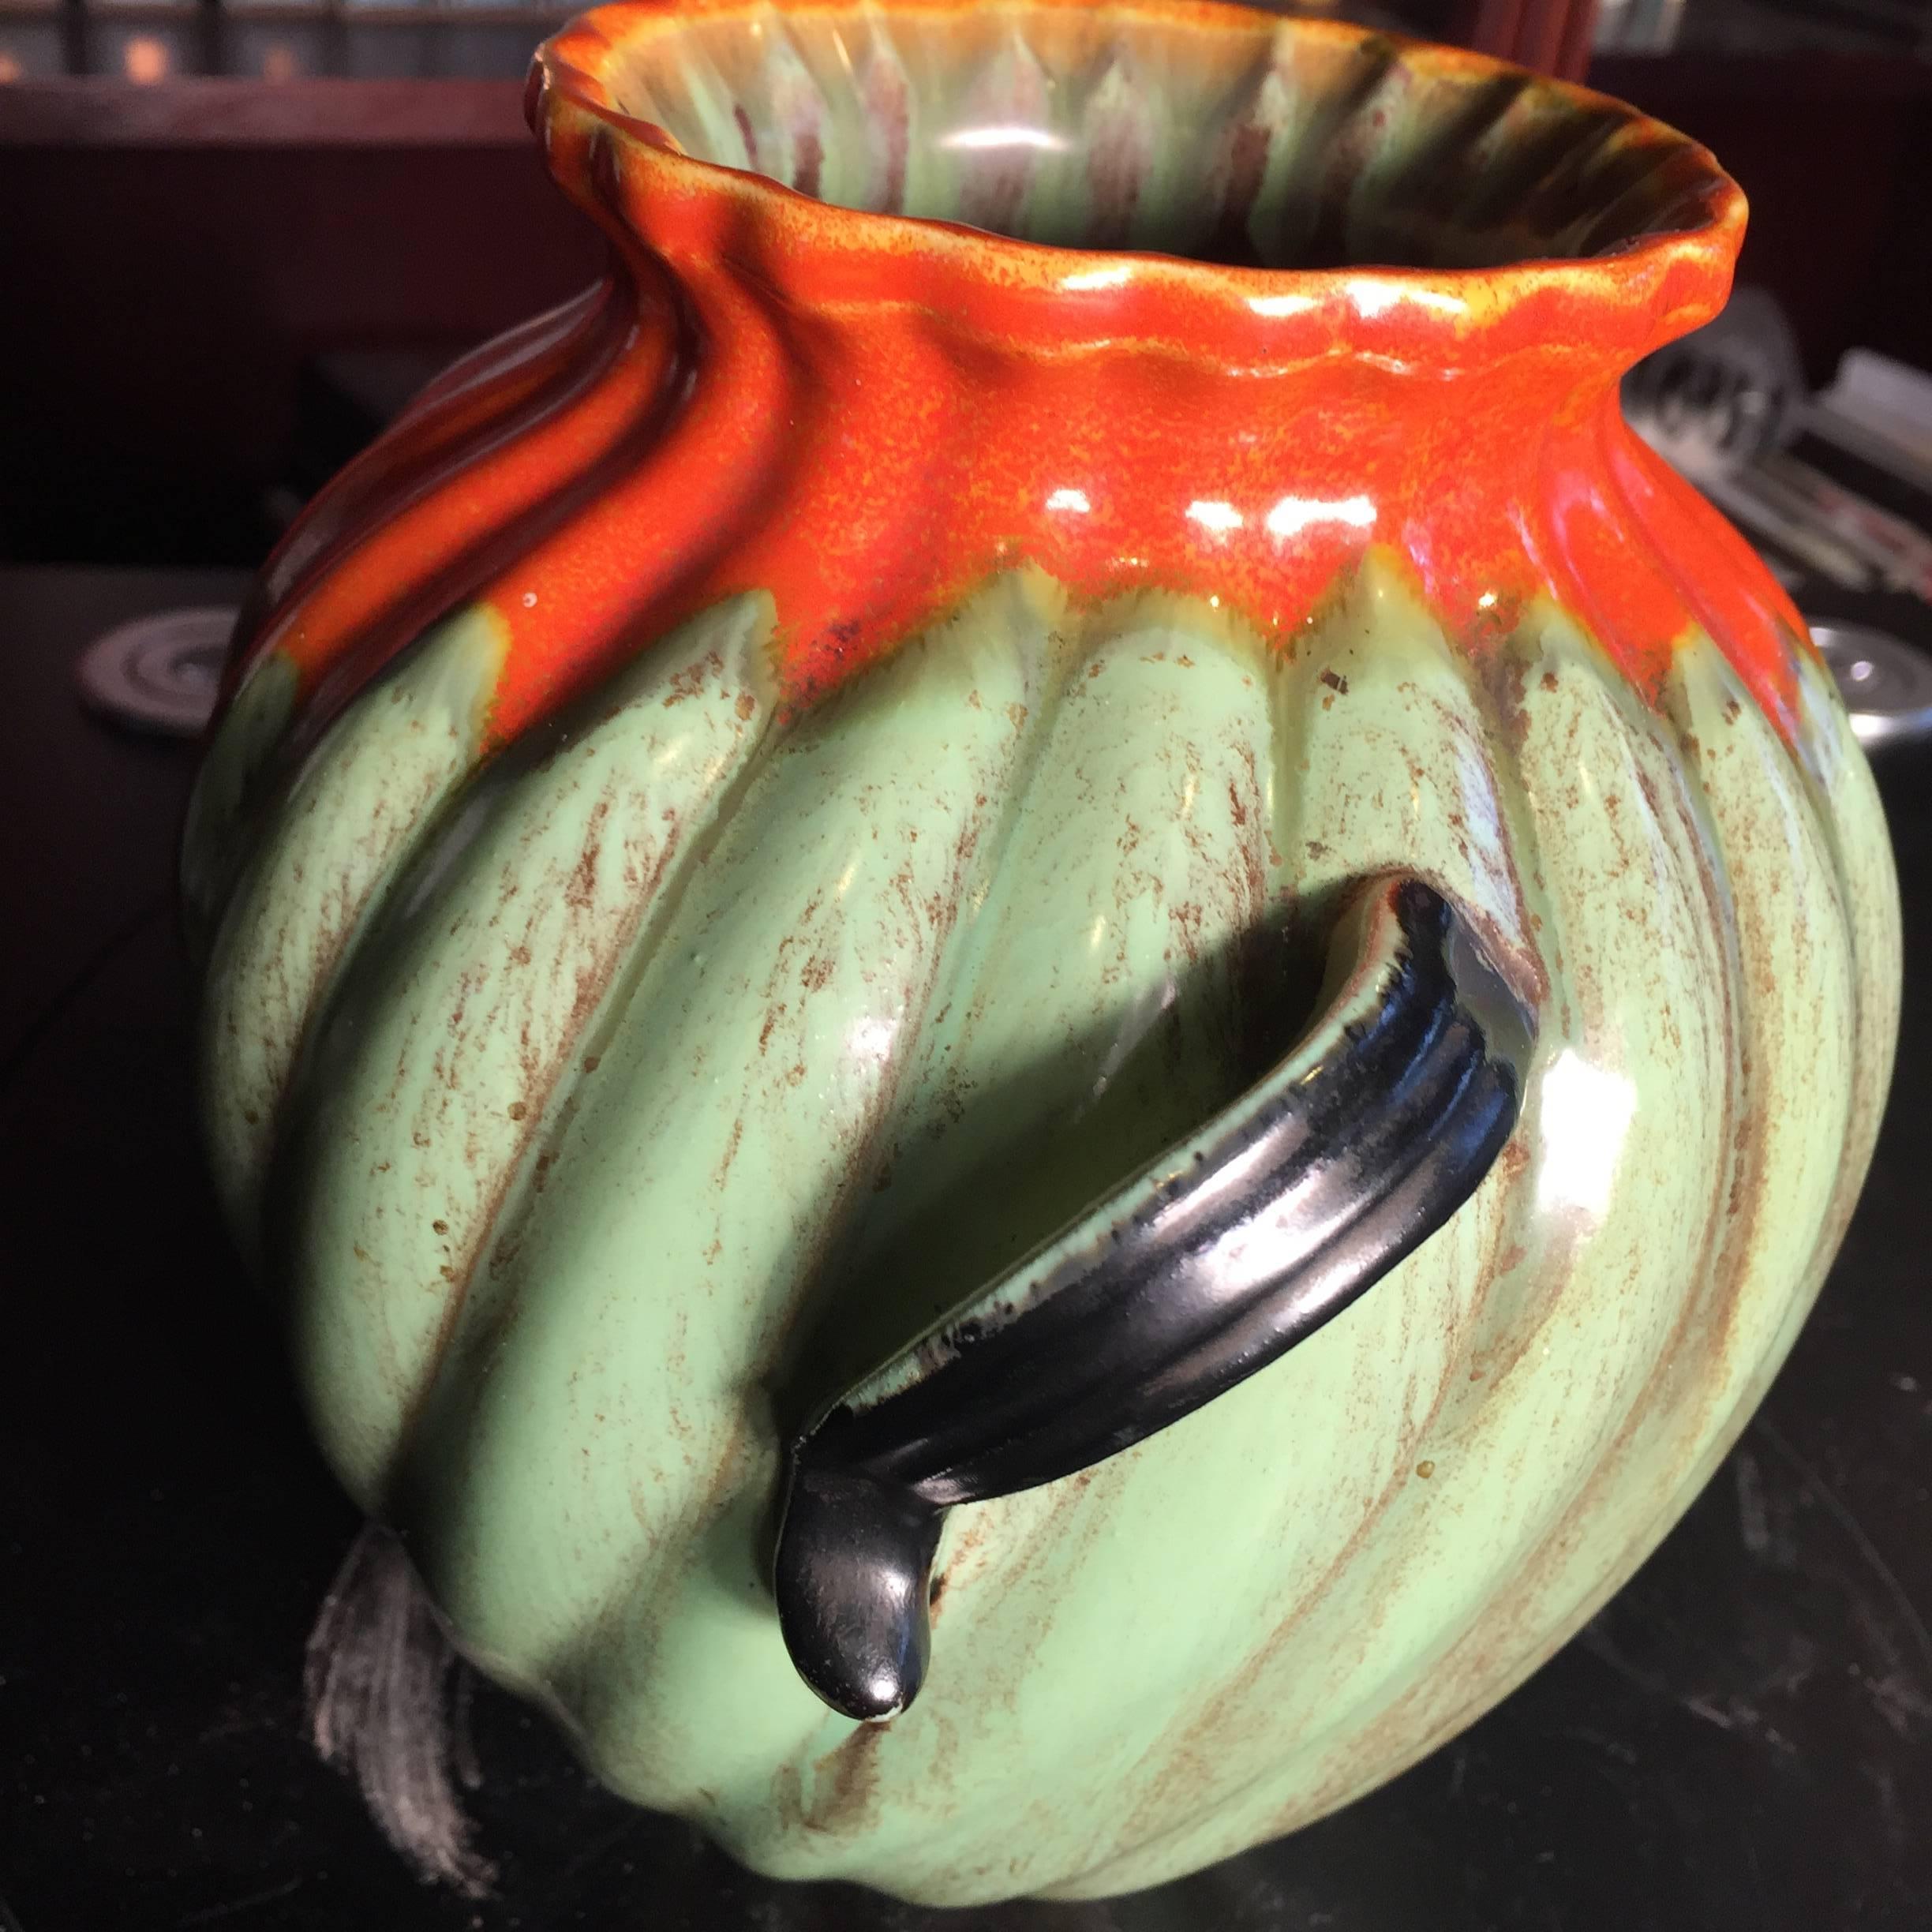 Hand-Crafted Sweet Antique Two Handled Pot in Organic Green and Tomato Red Colors, 1960